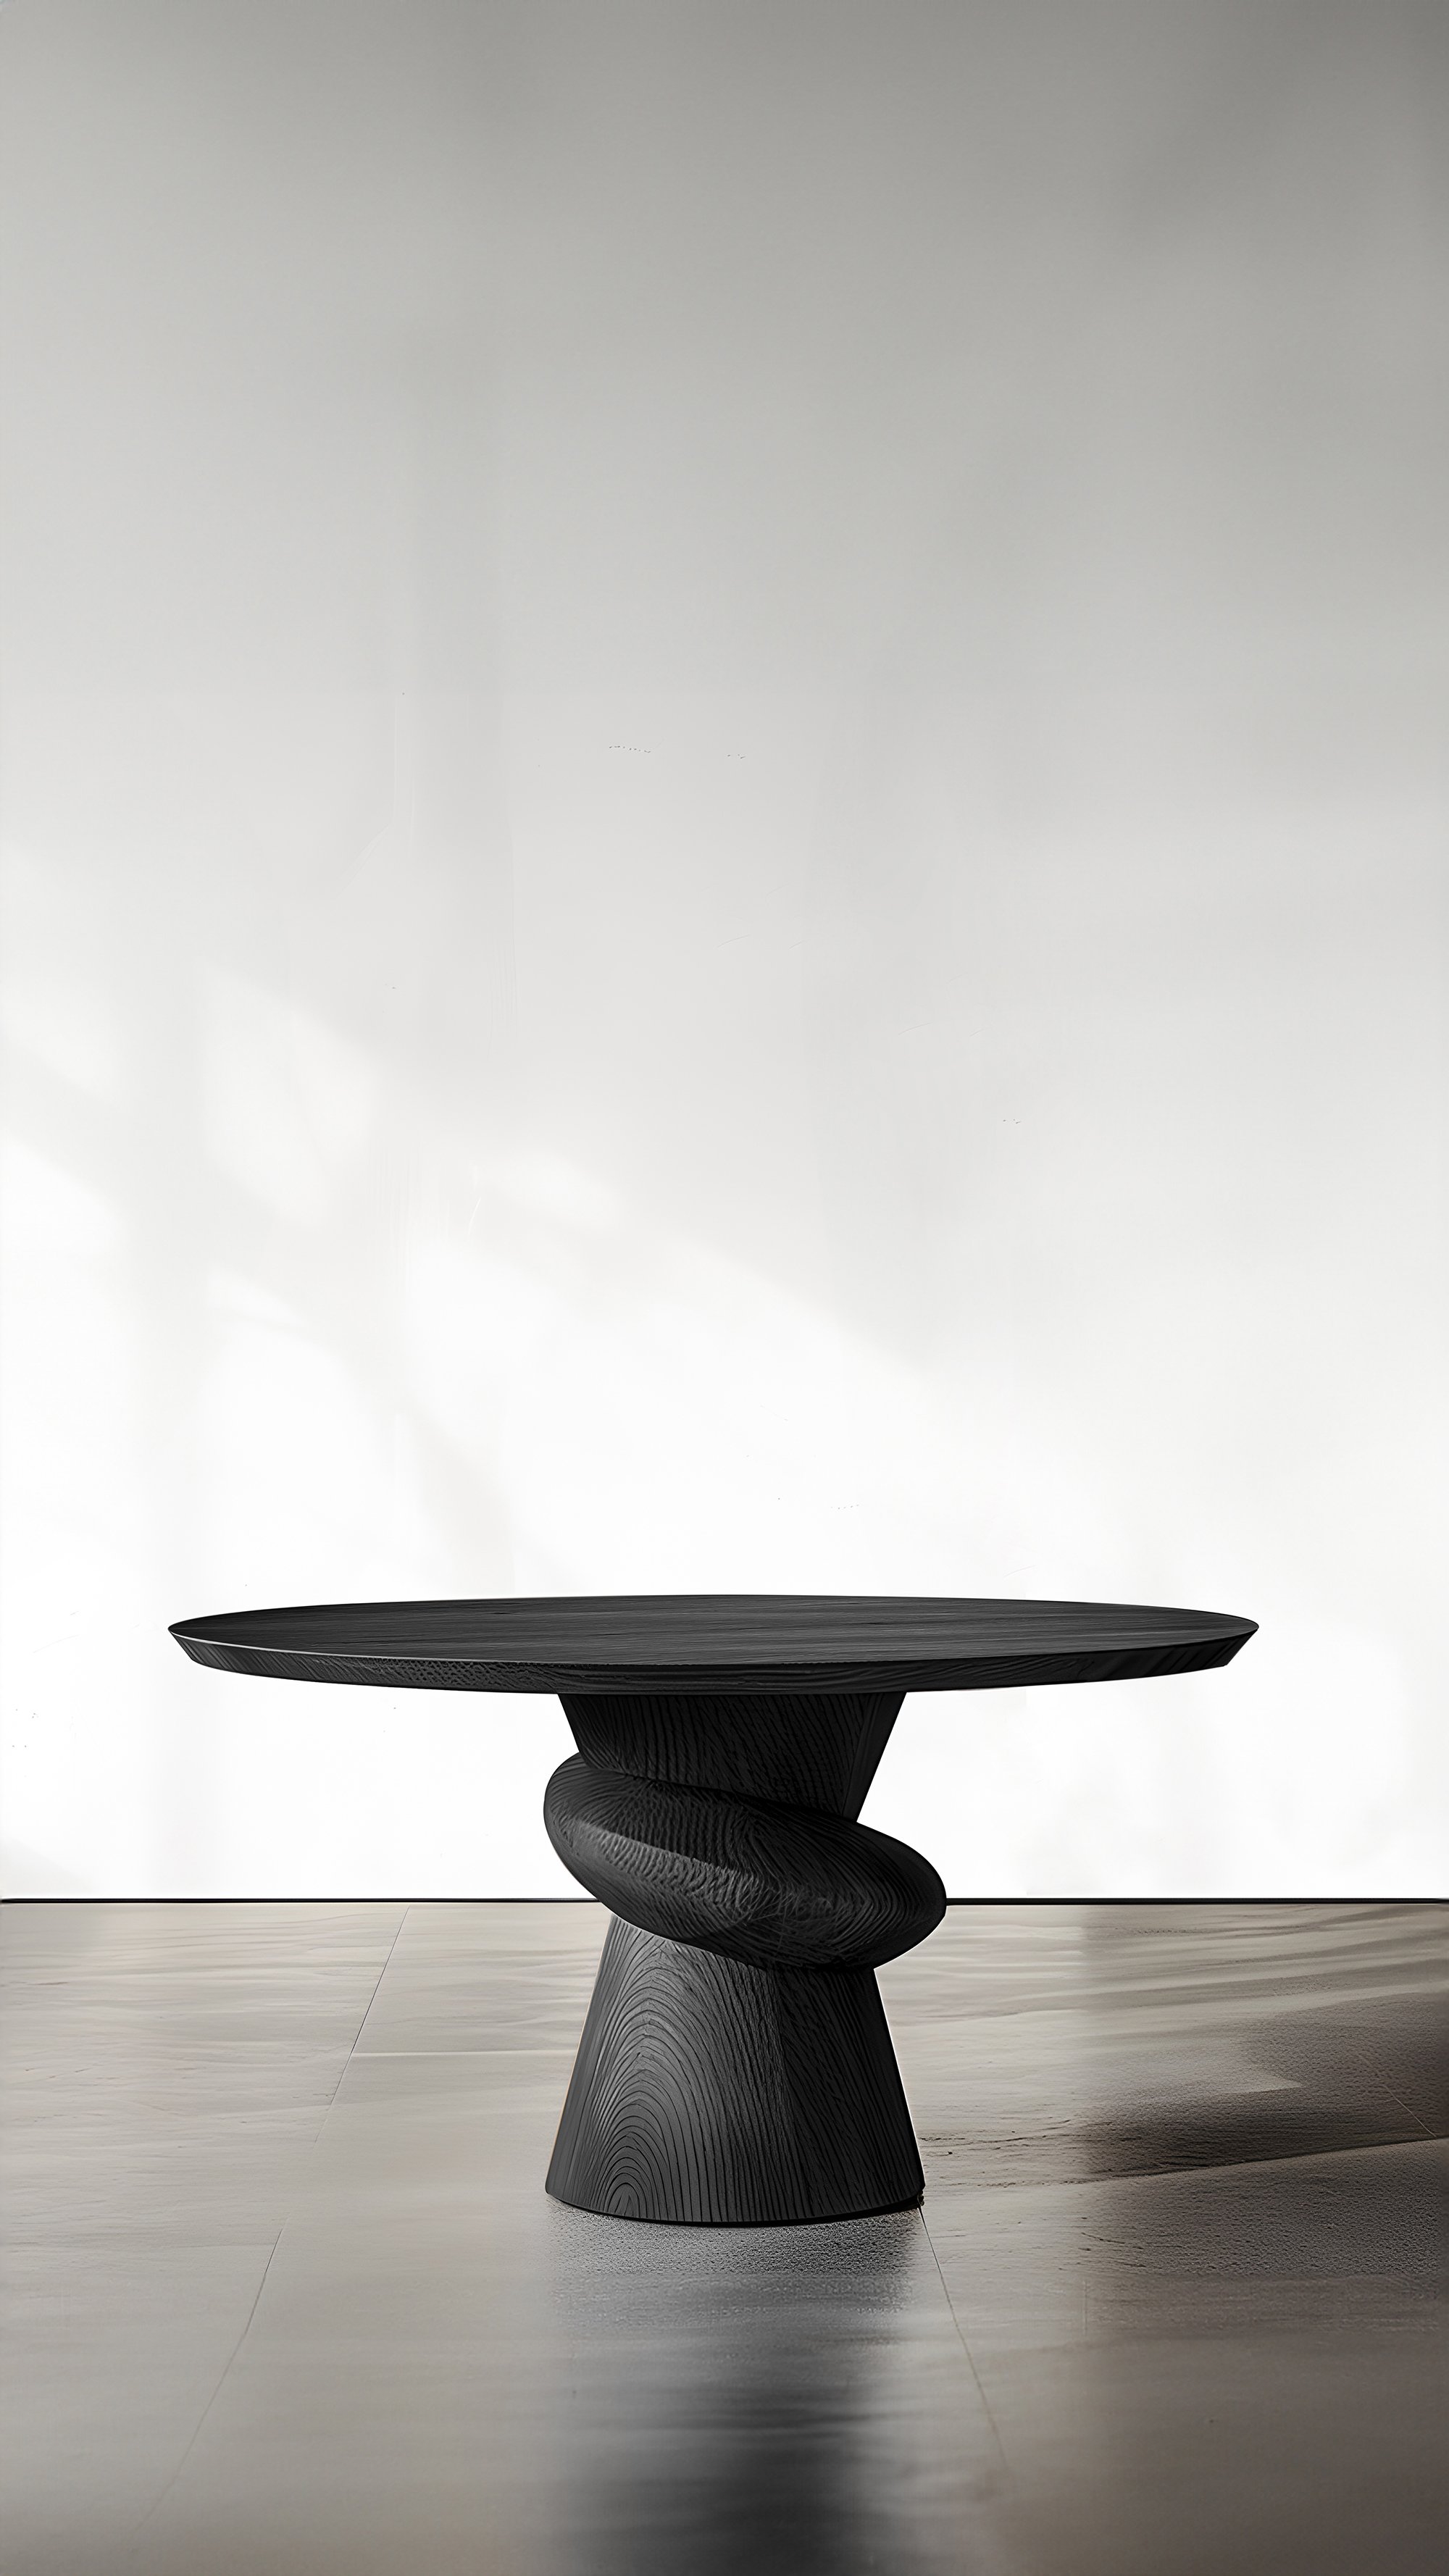 Desks and Writing Tables No09, Socle Series in Black Wood by Joel Escalona - 4.jpg